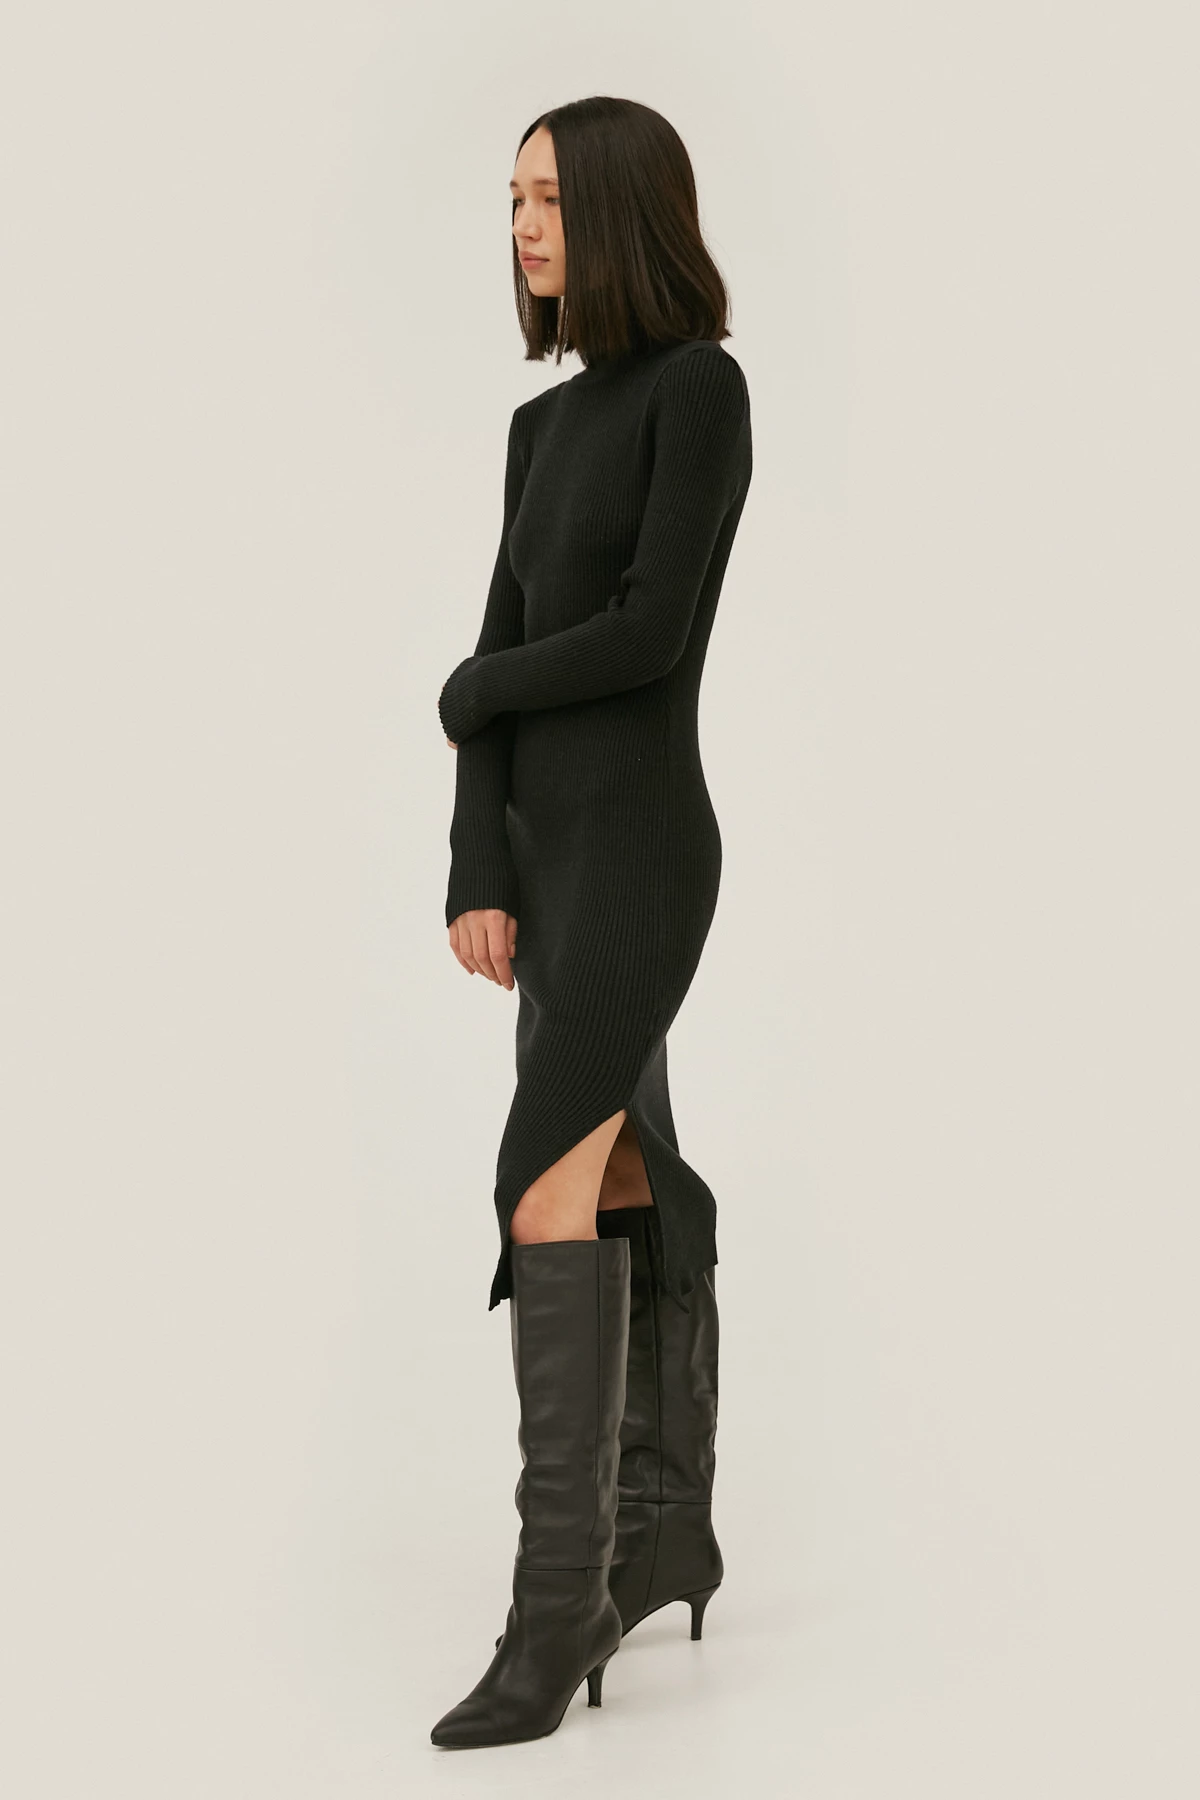 Knitted black dress with neckline and viscose, photo 3